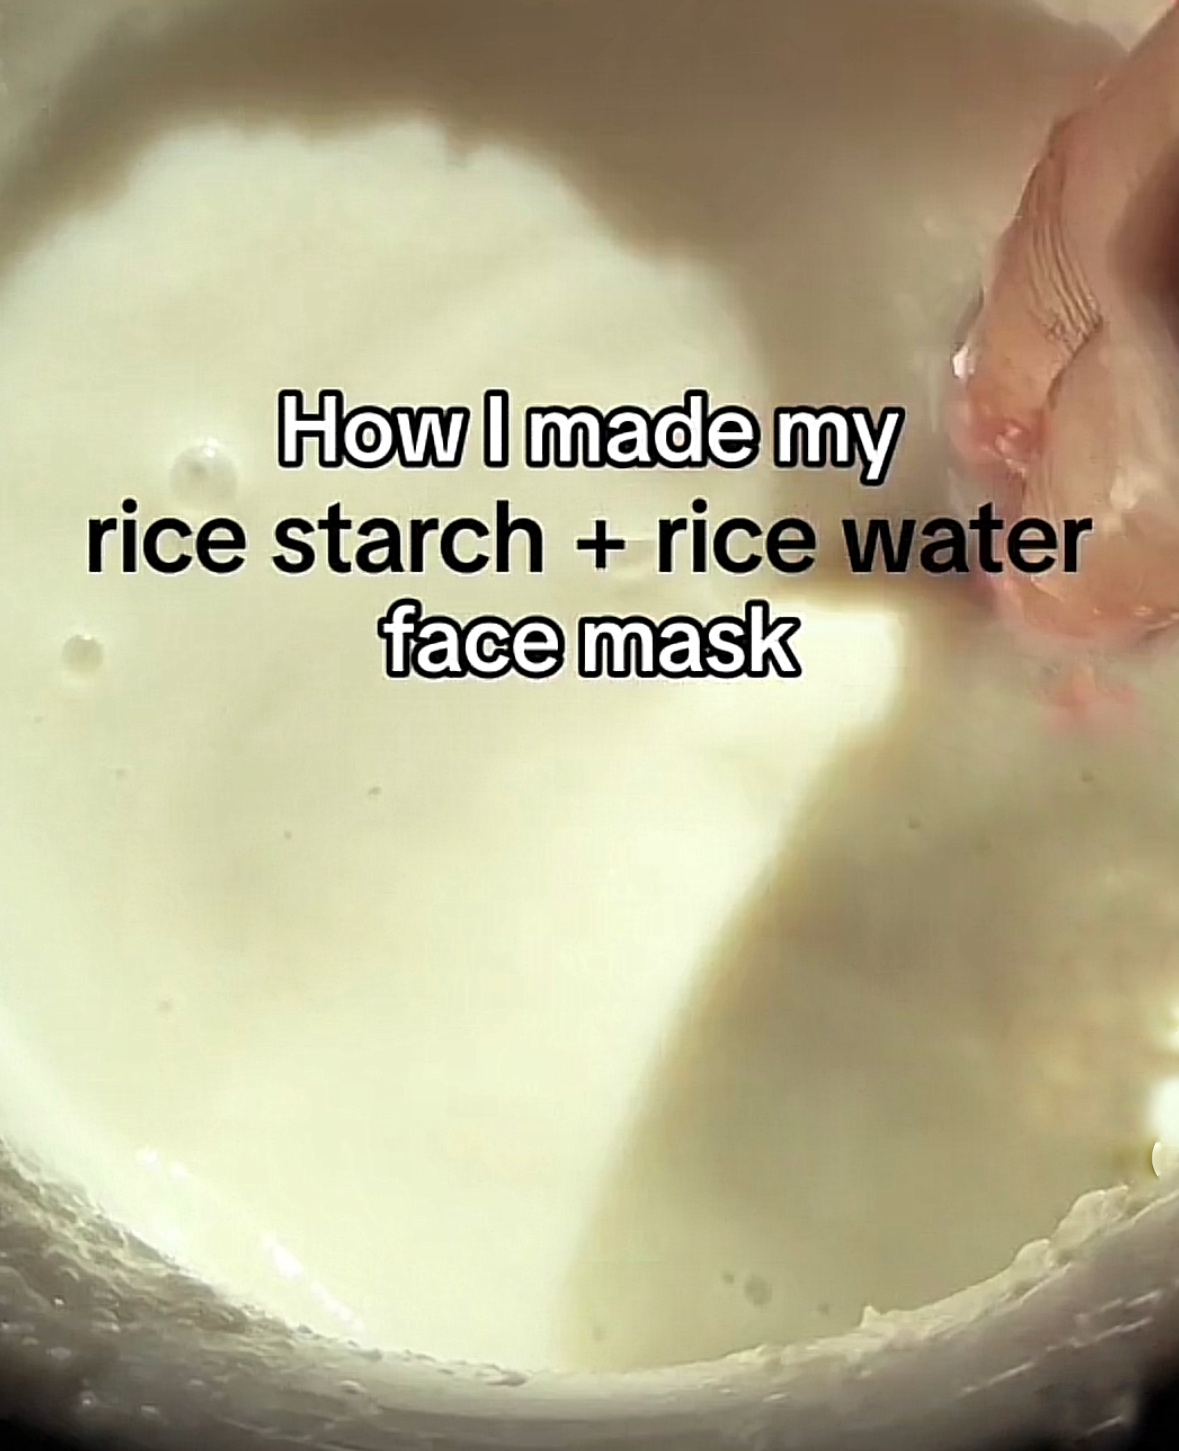 how to make rice starch